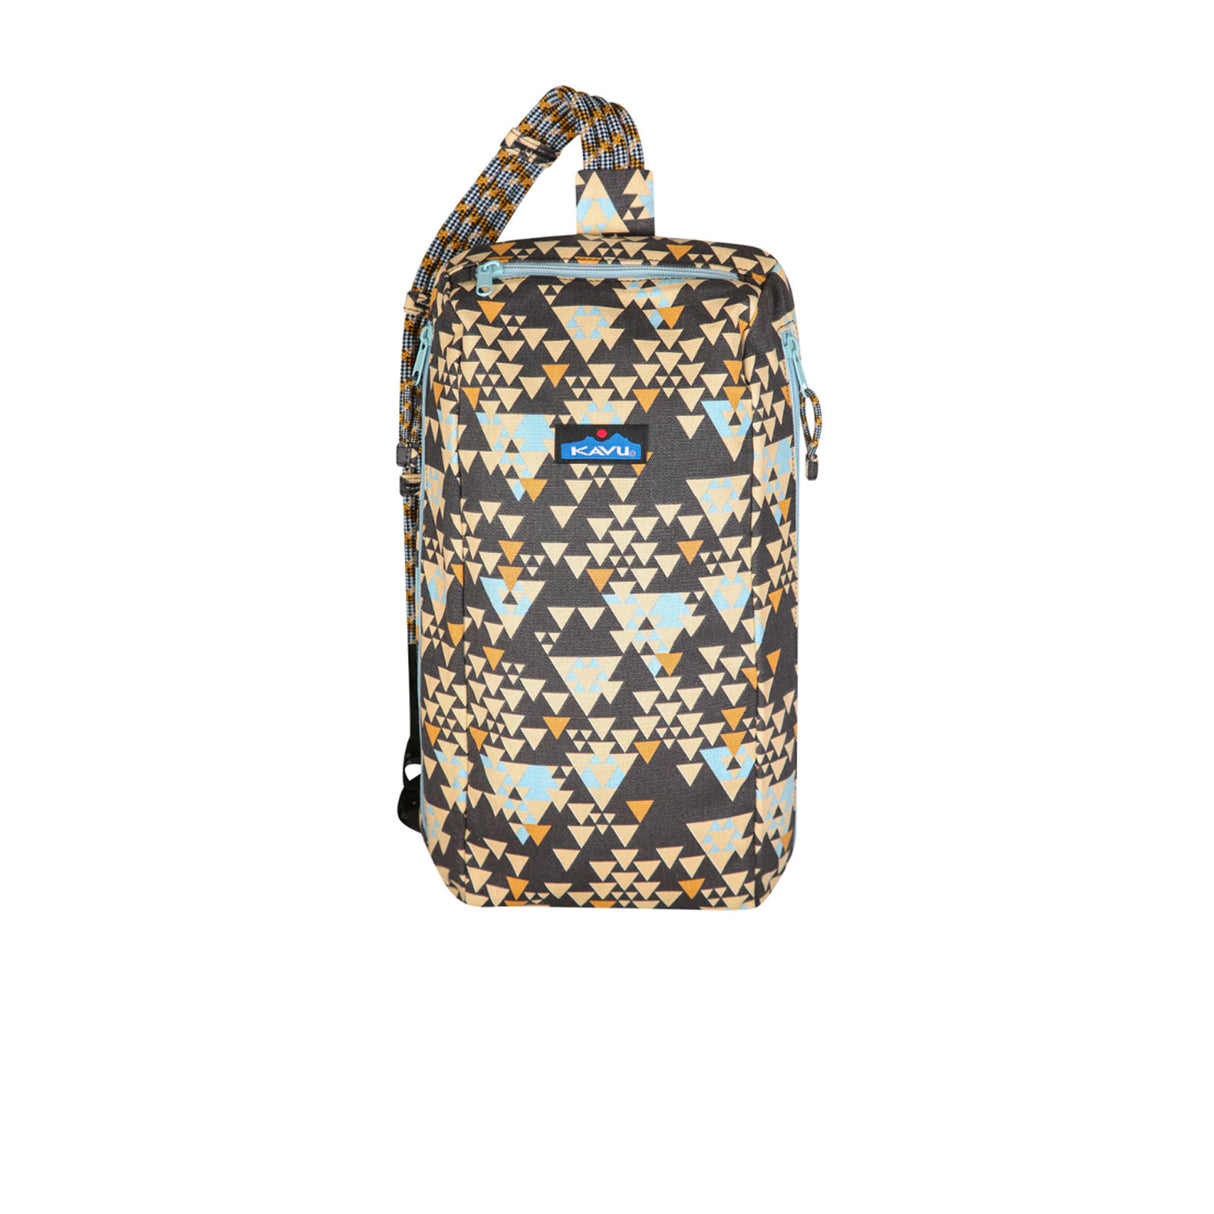 Kavu Switch Slinger Bag - Tri Cascades Accessories - Bags - Backpacks - The Heel Shoe Fitters